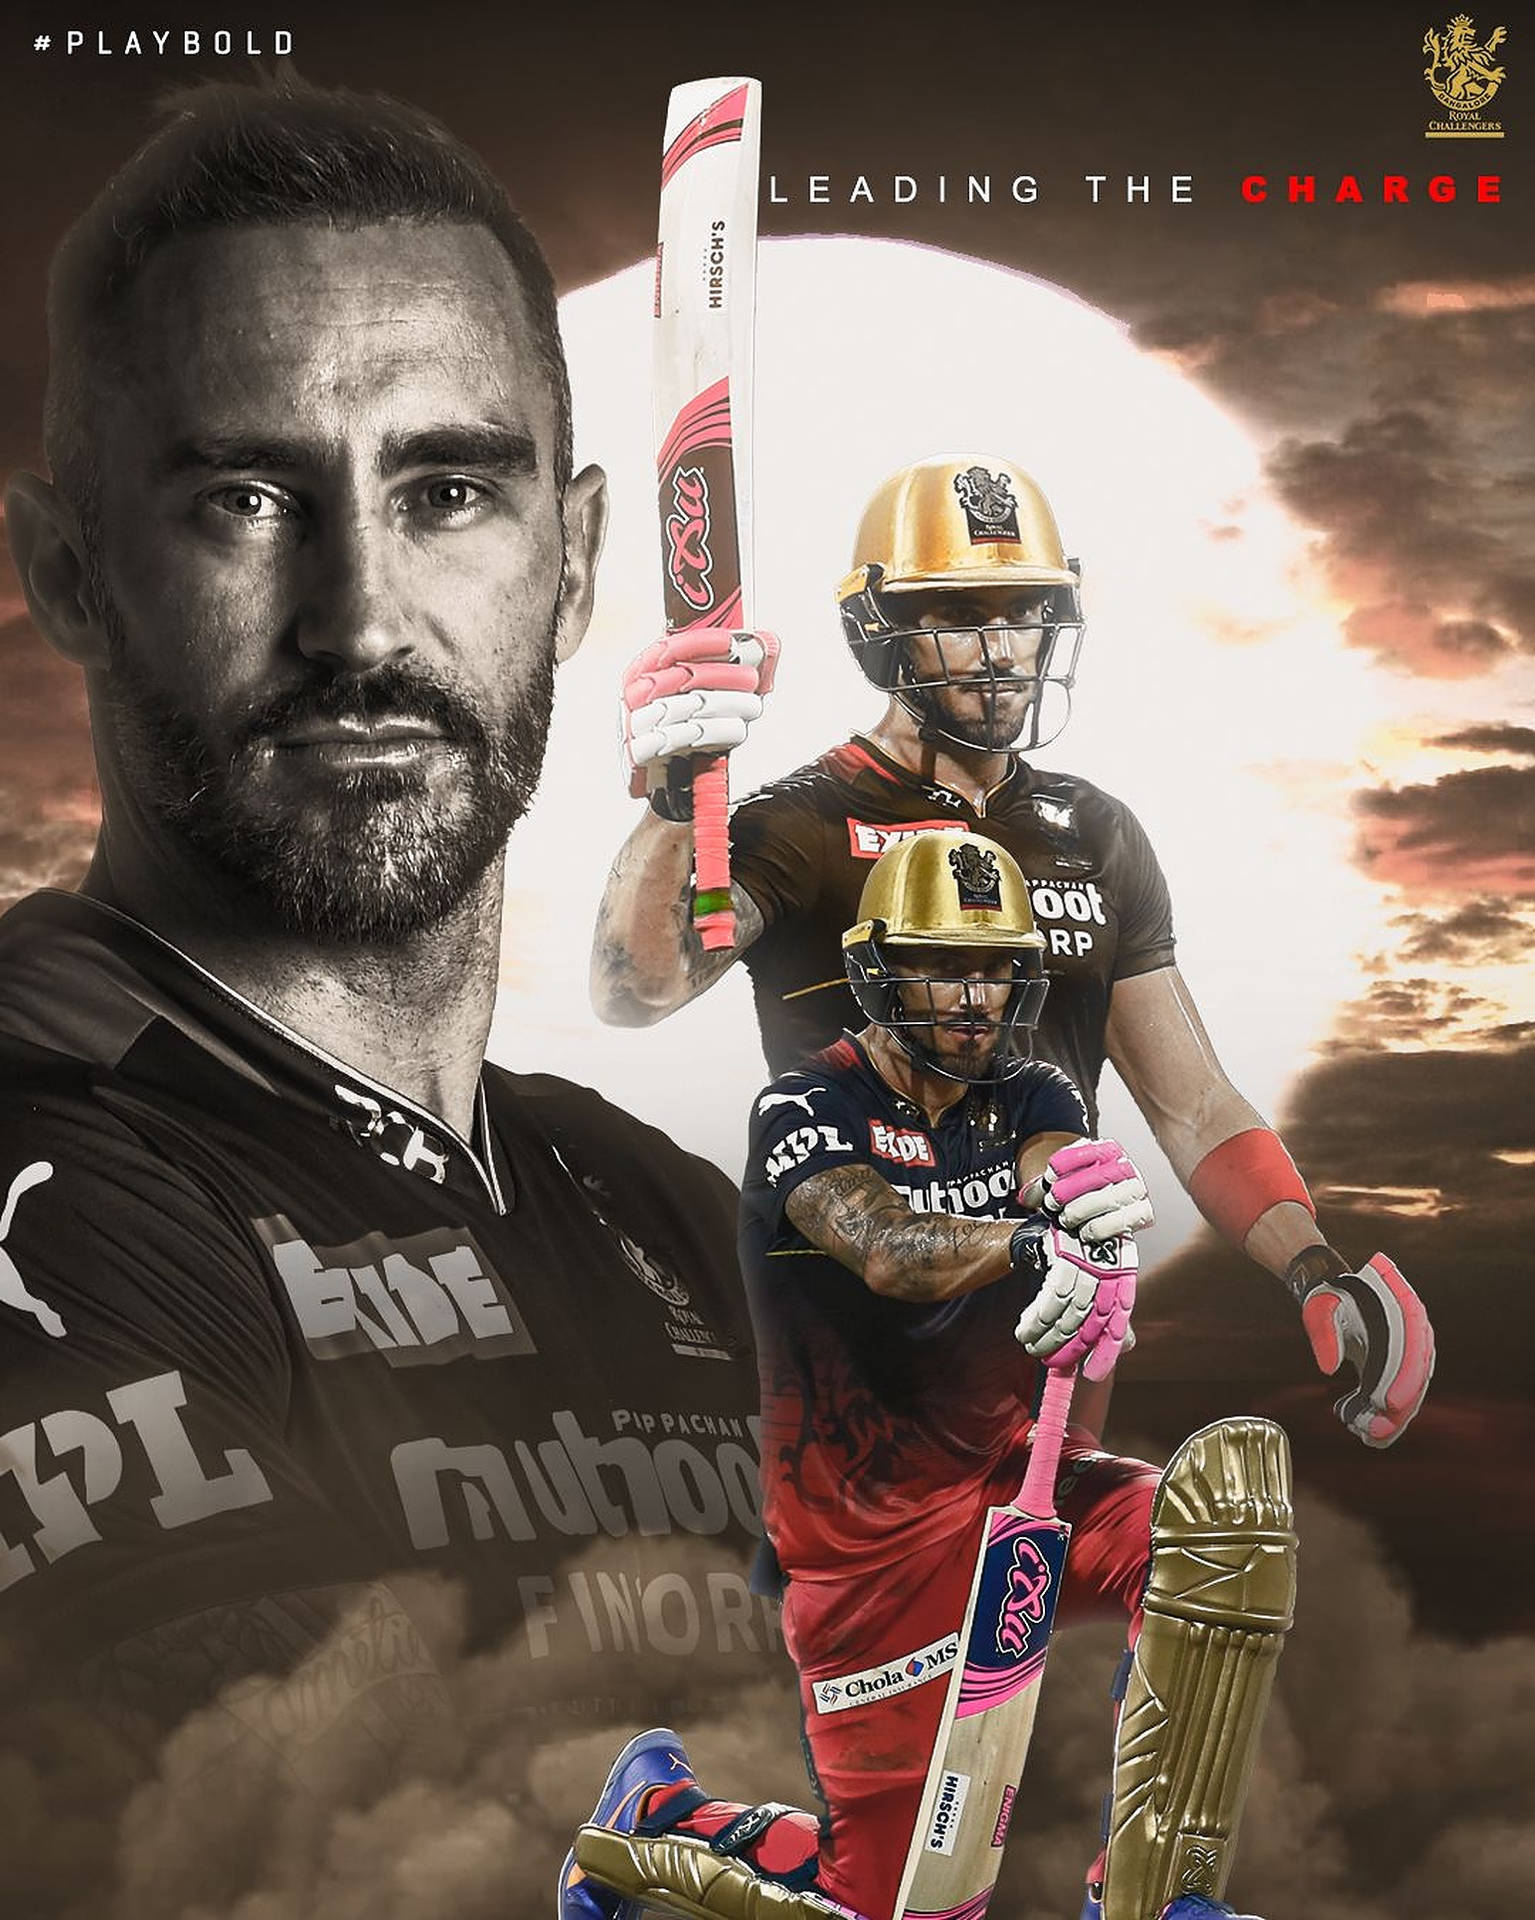 Royal Challengers Bangalore Leading The Charge Wallpaper